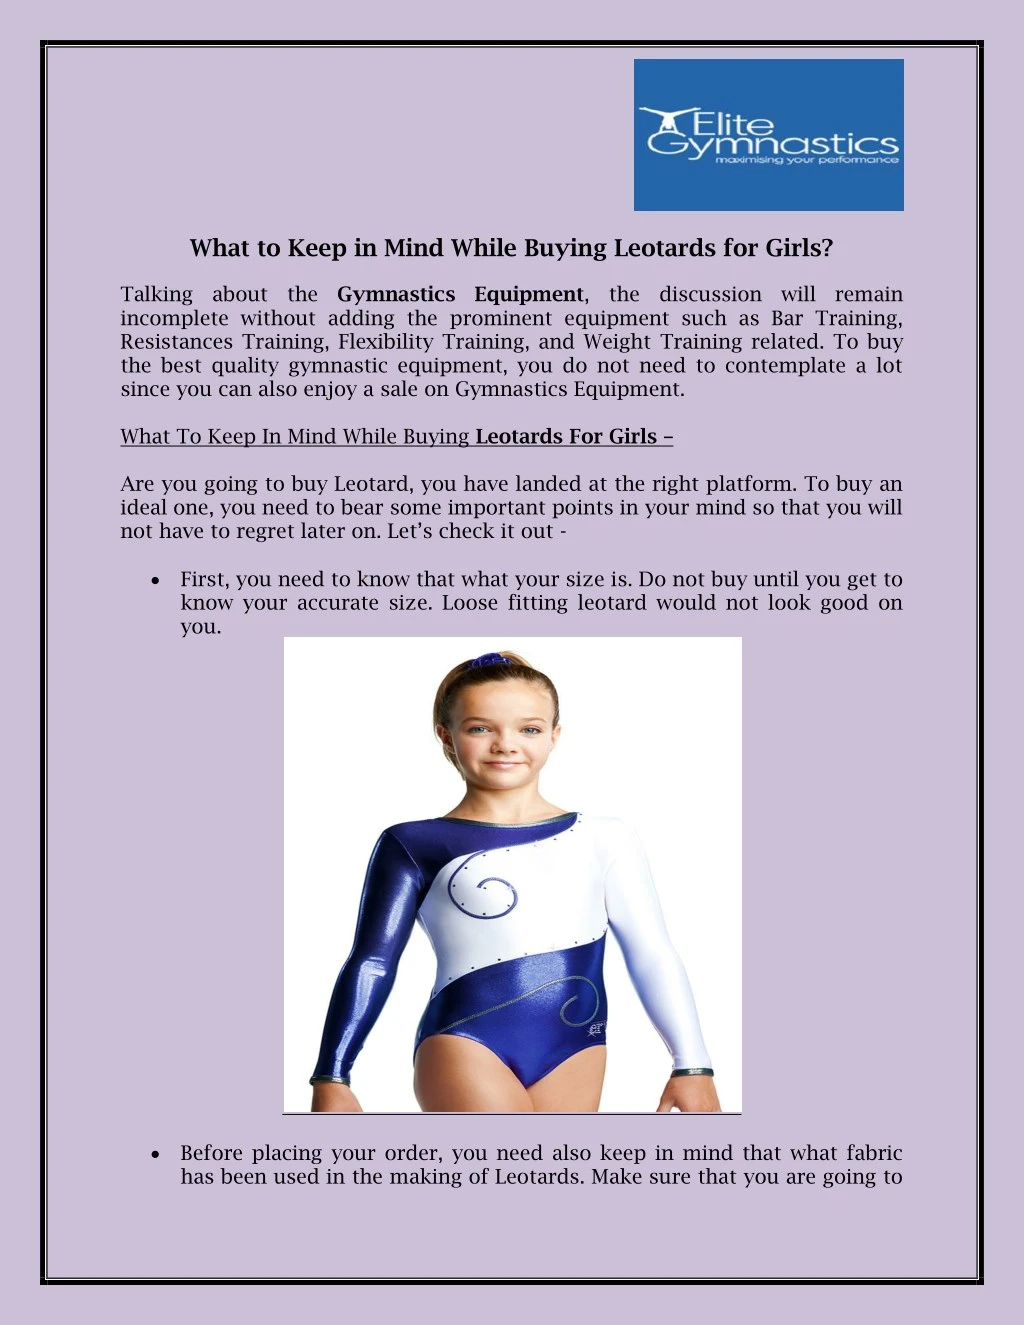 what to keep in mind while buying leotards